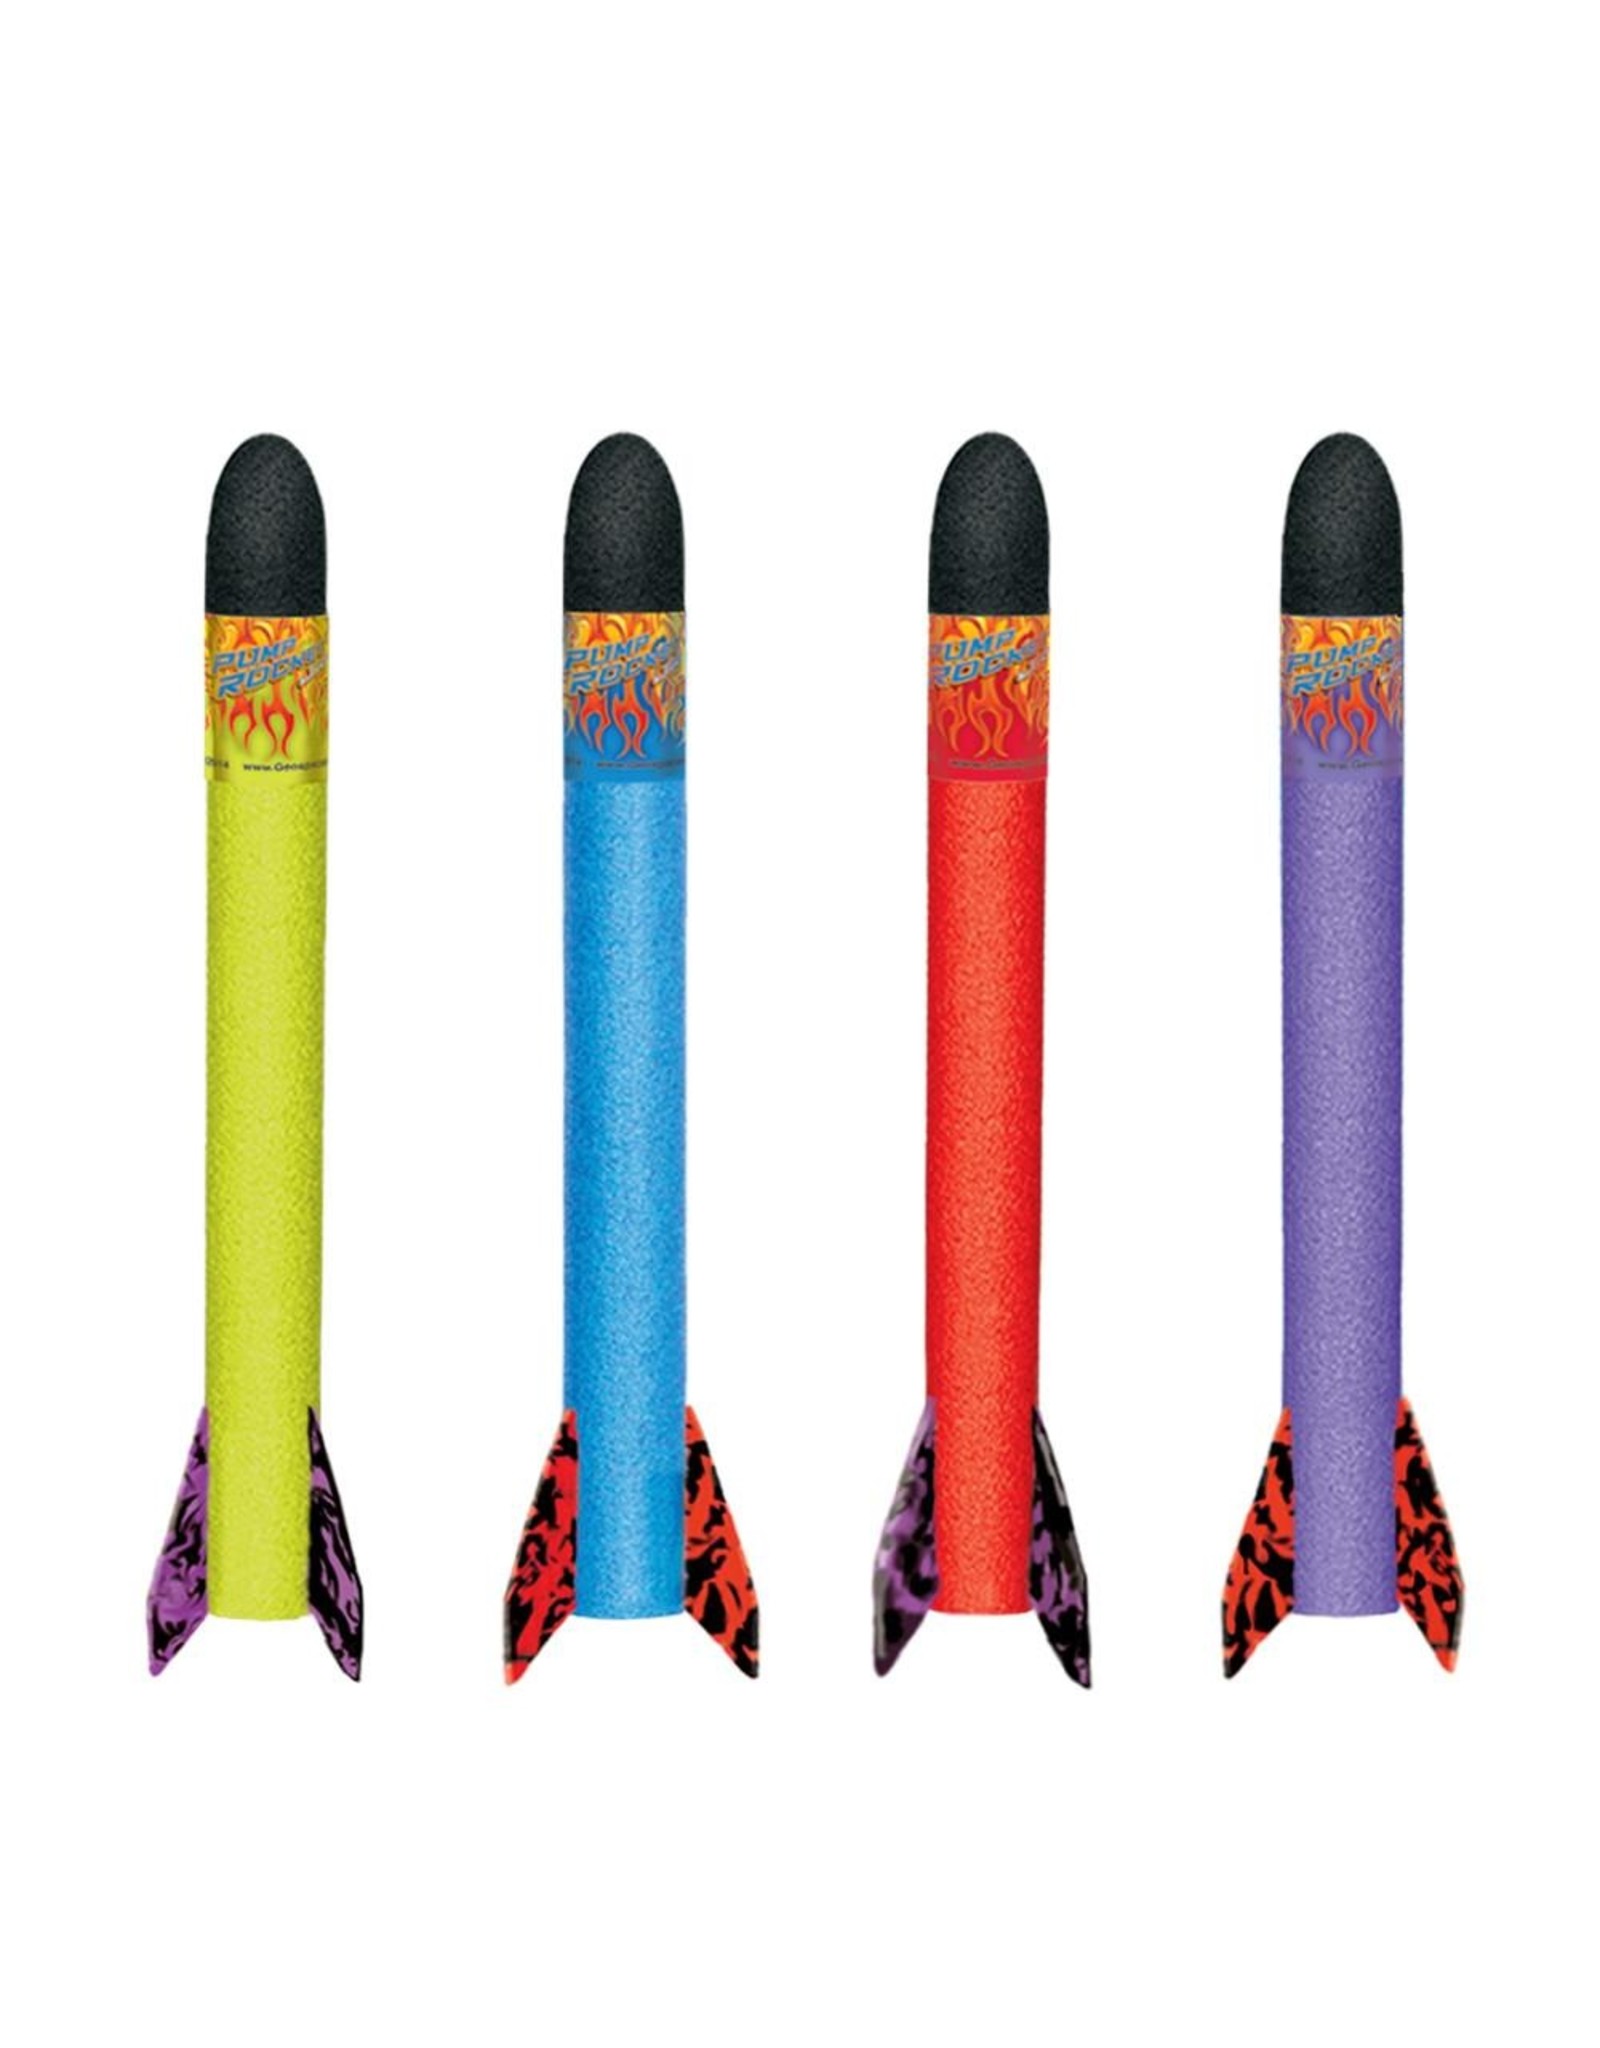 Geospace Pump/Jump Rocket 4 Pack Replacements